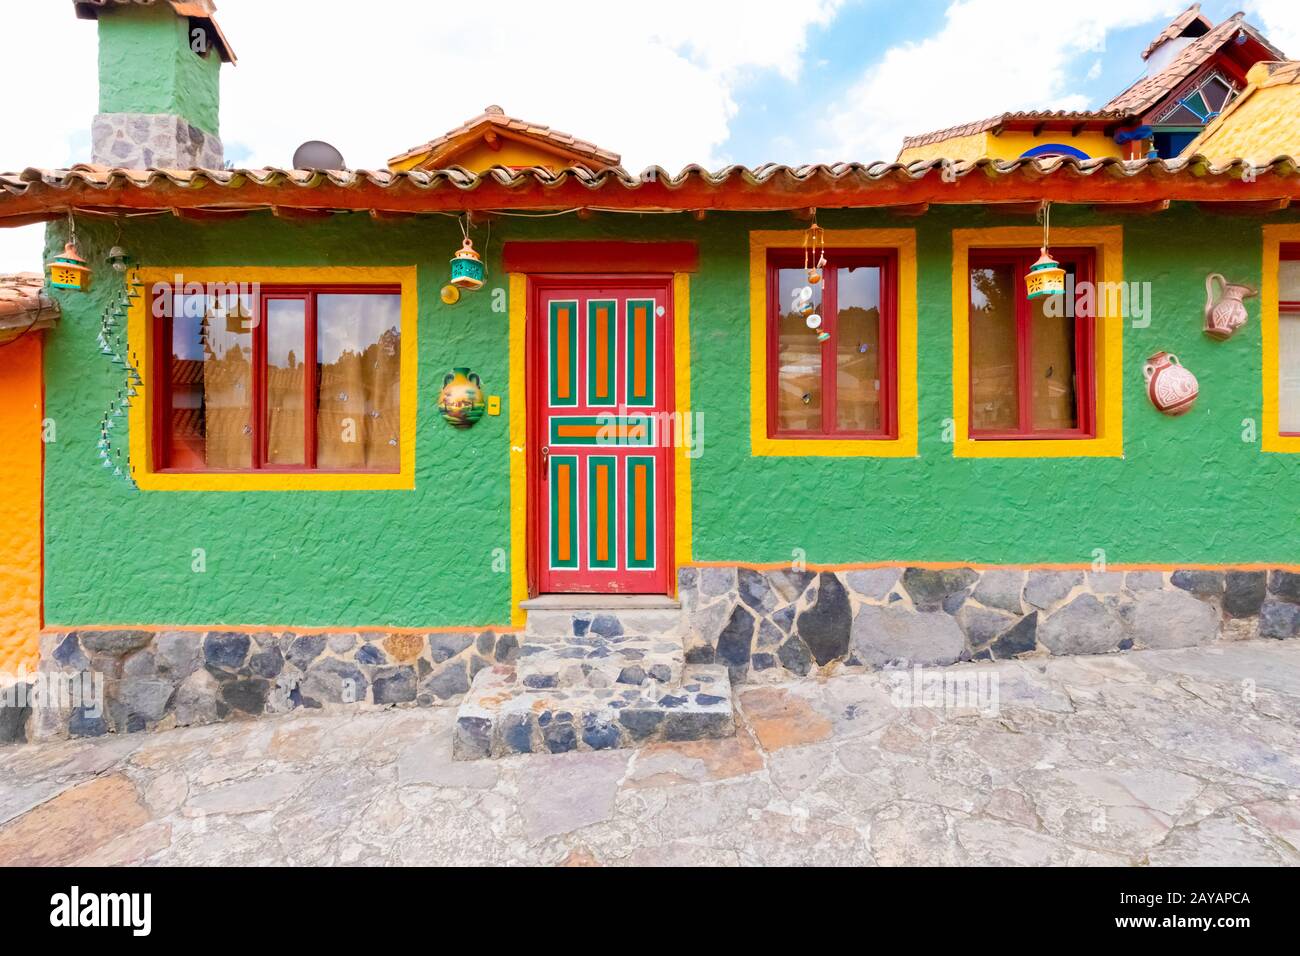 Raquira typical traditional colorful house Stock Photo